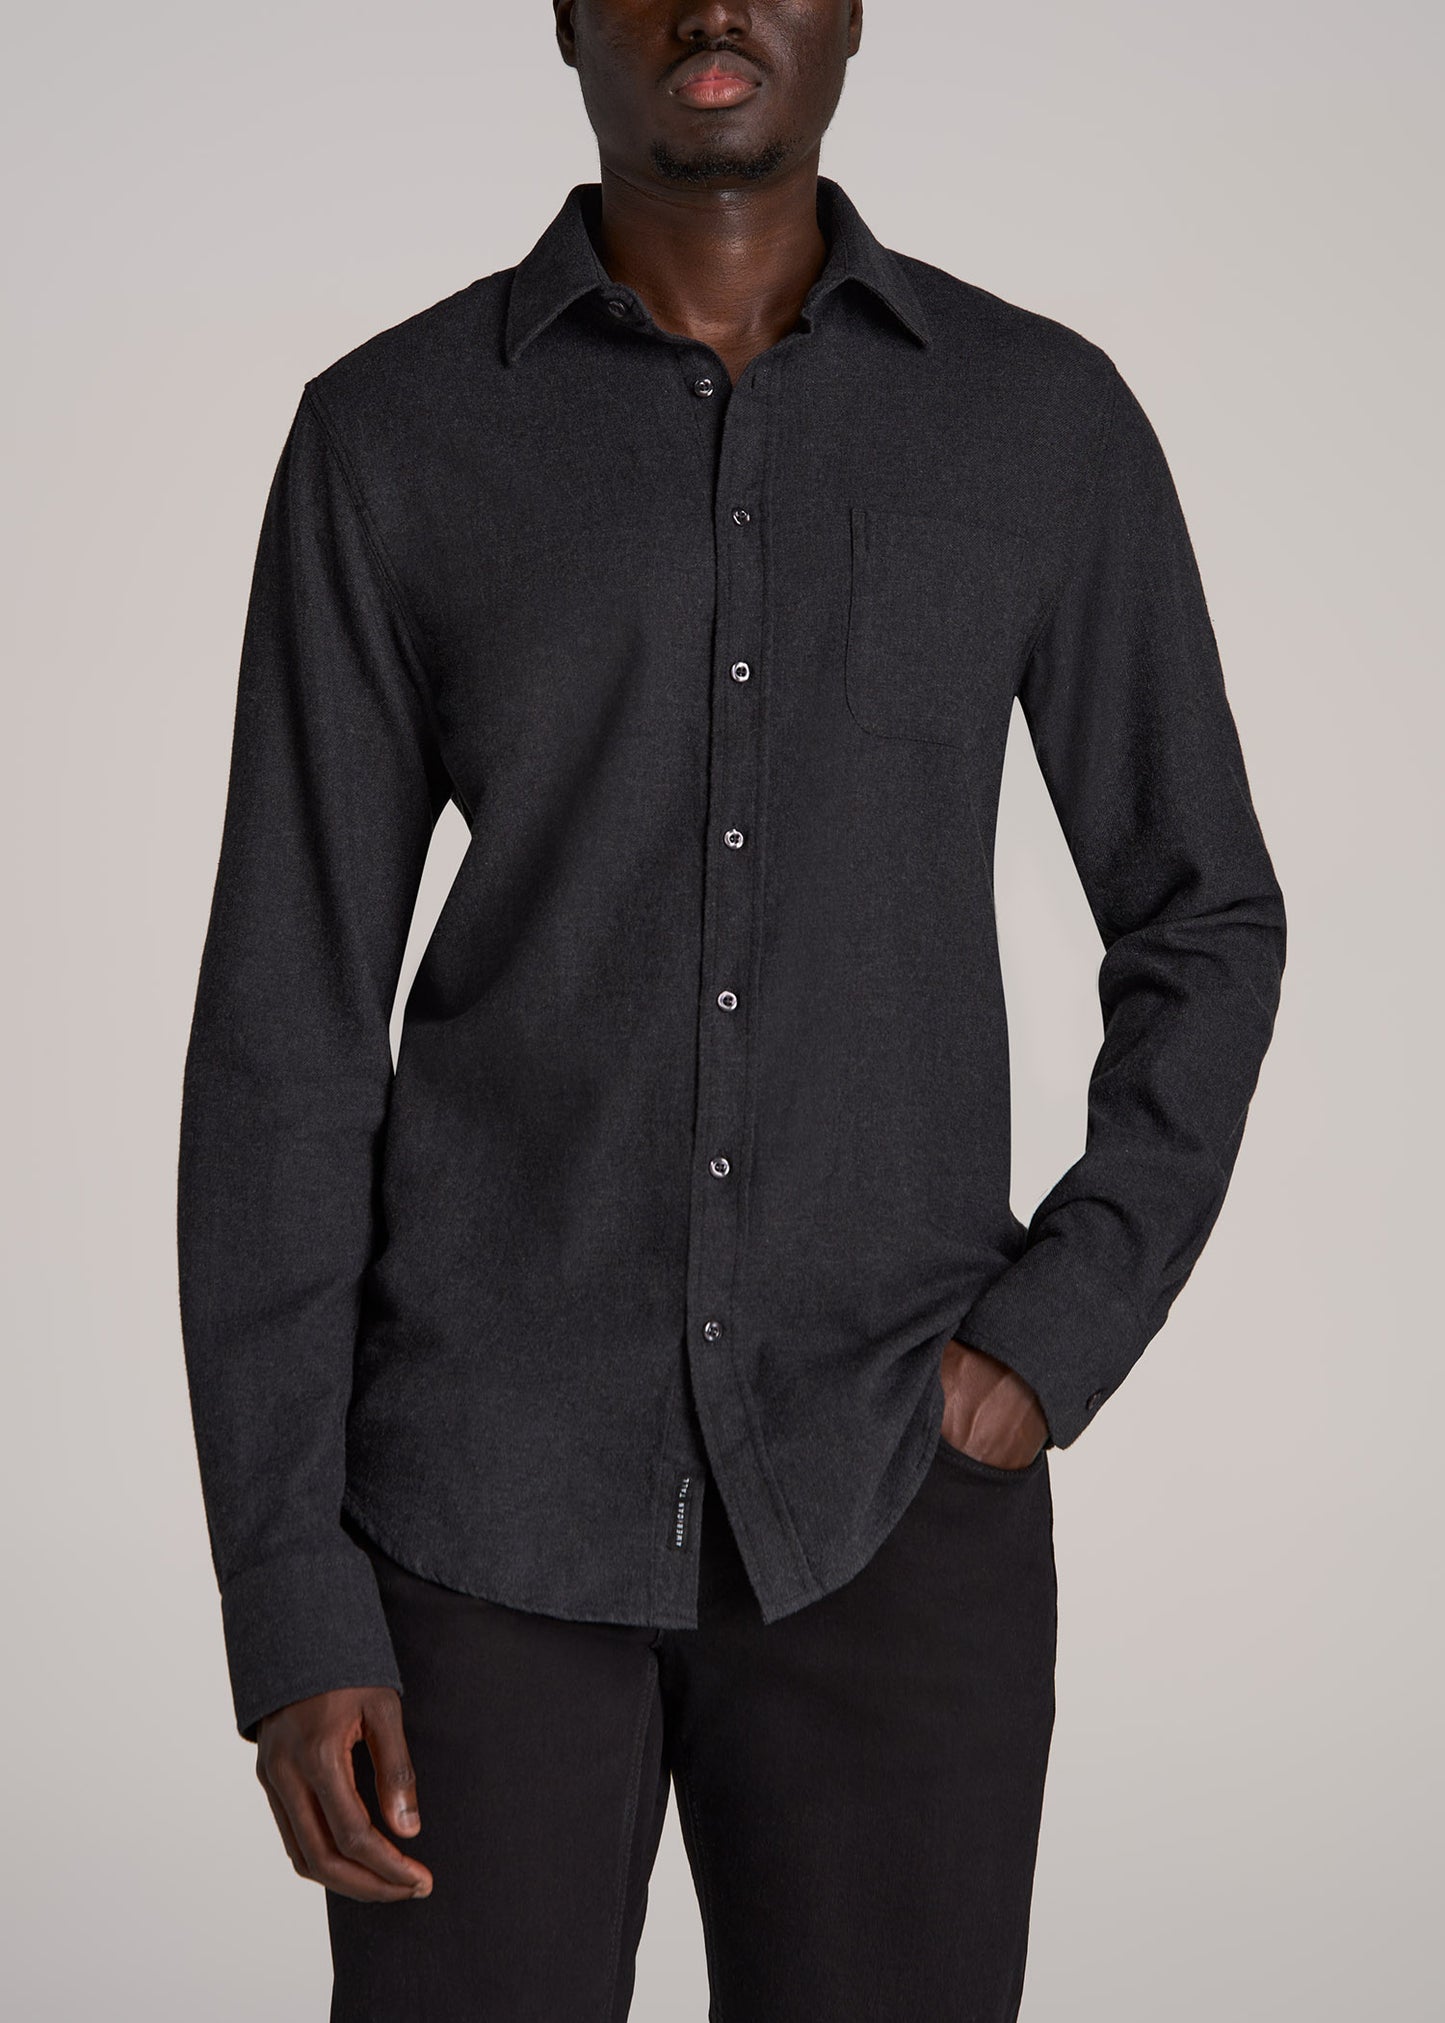 Nelson Flannel Shirt for Tall Men in Charcoal Mix